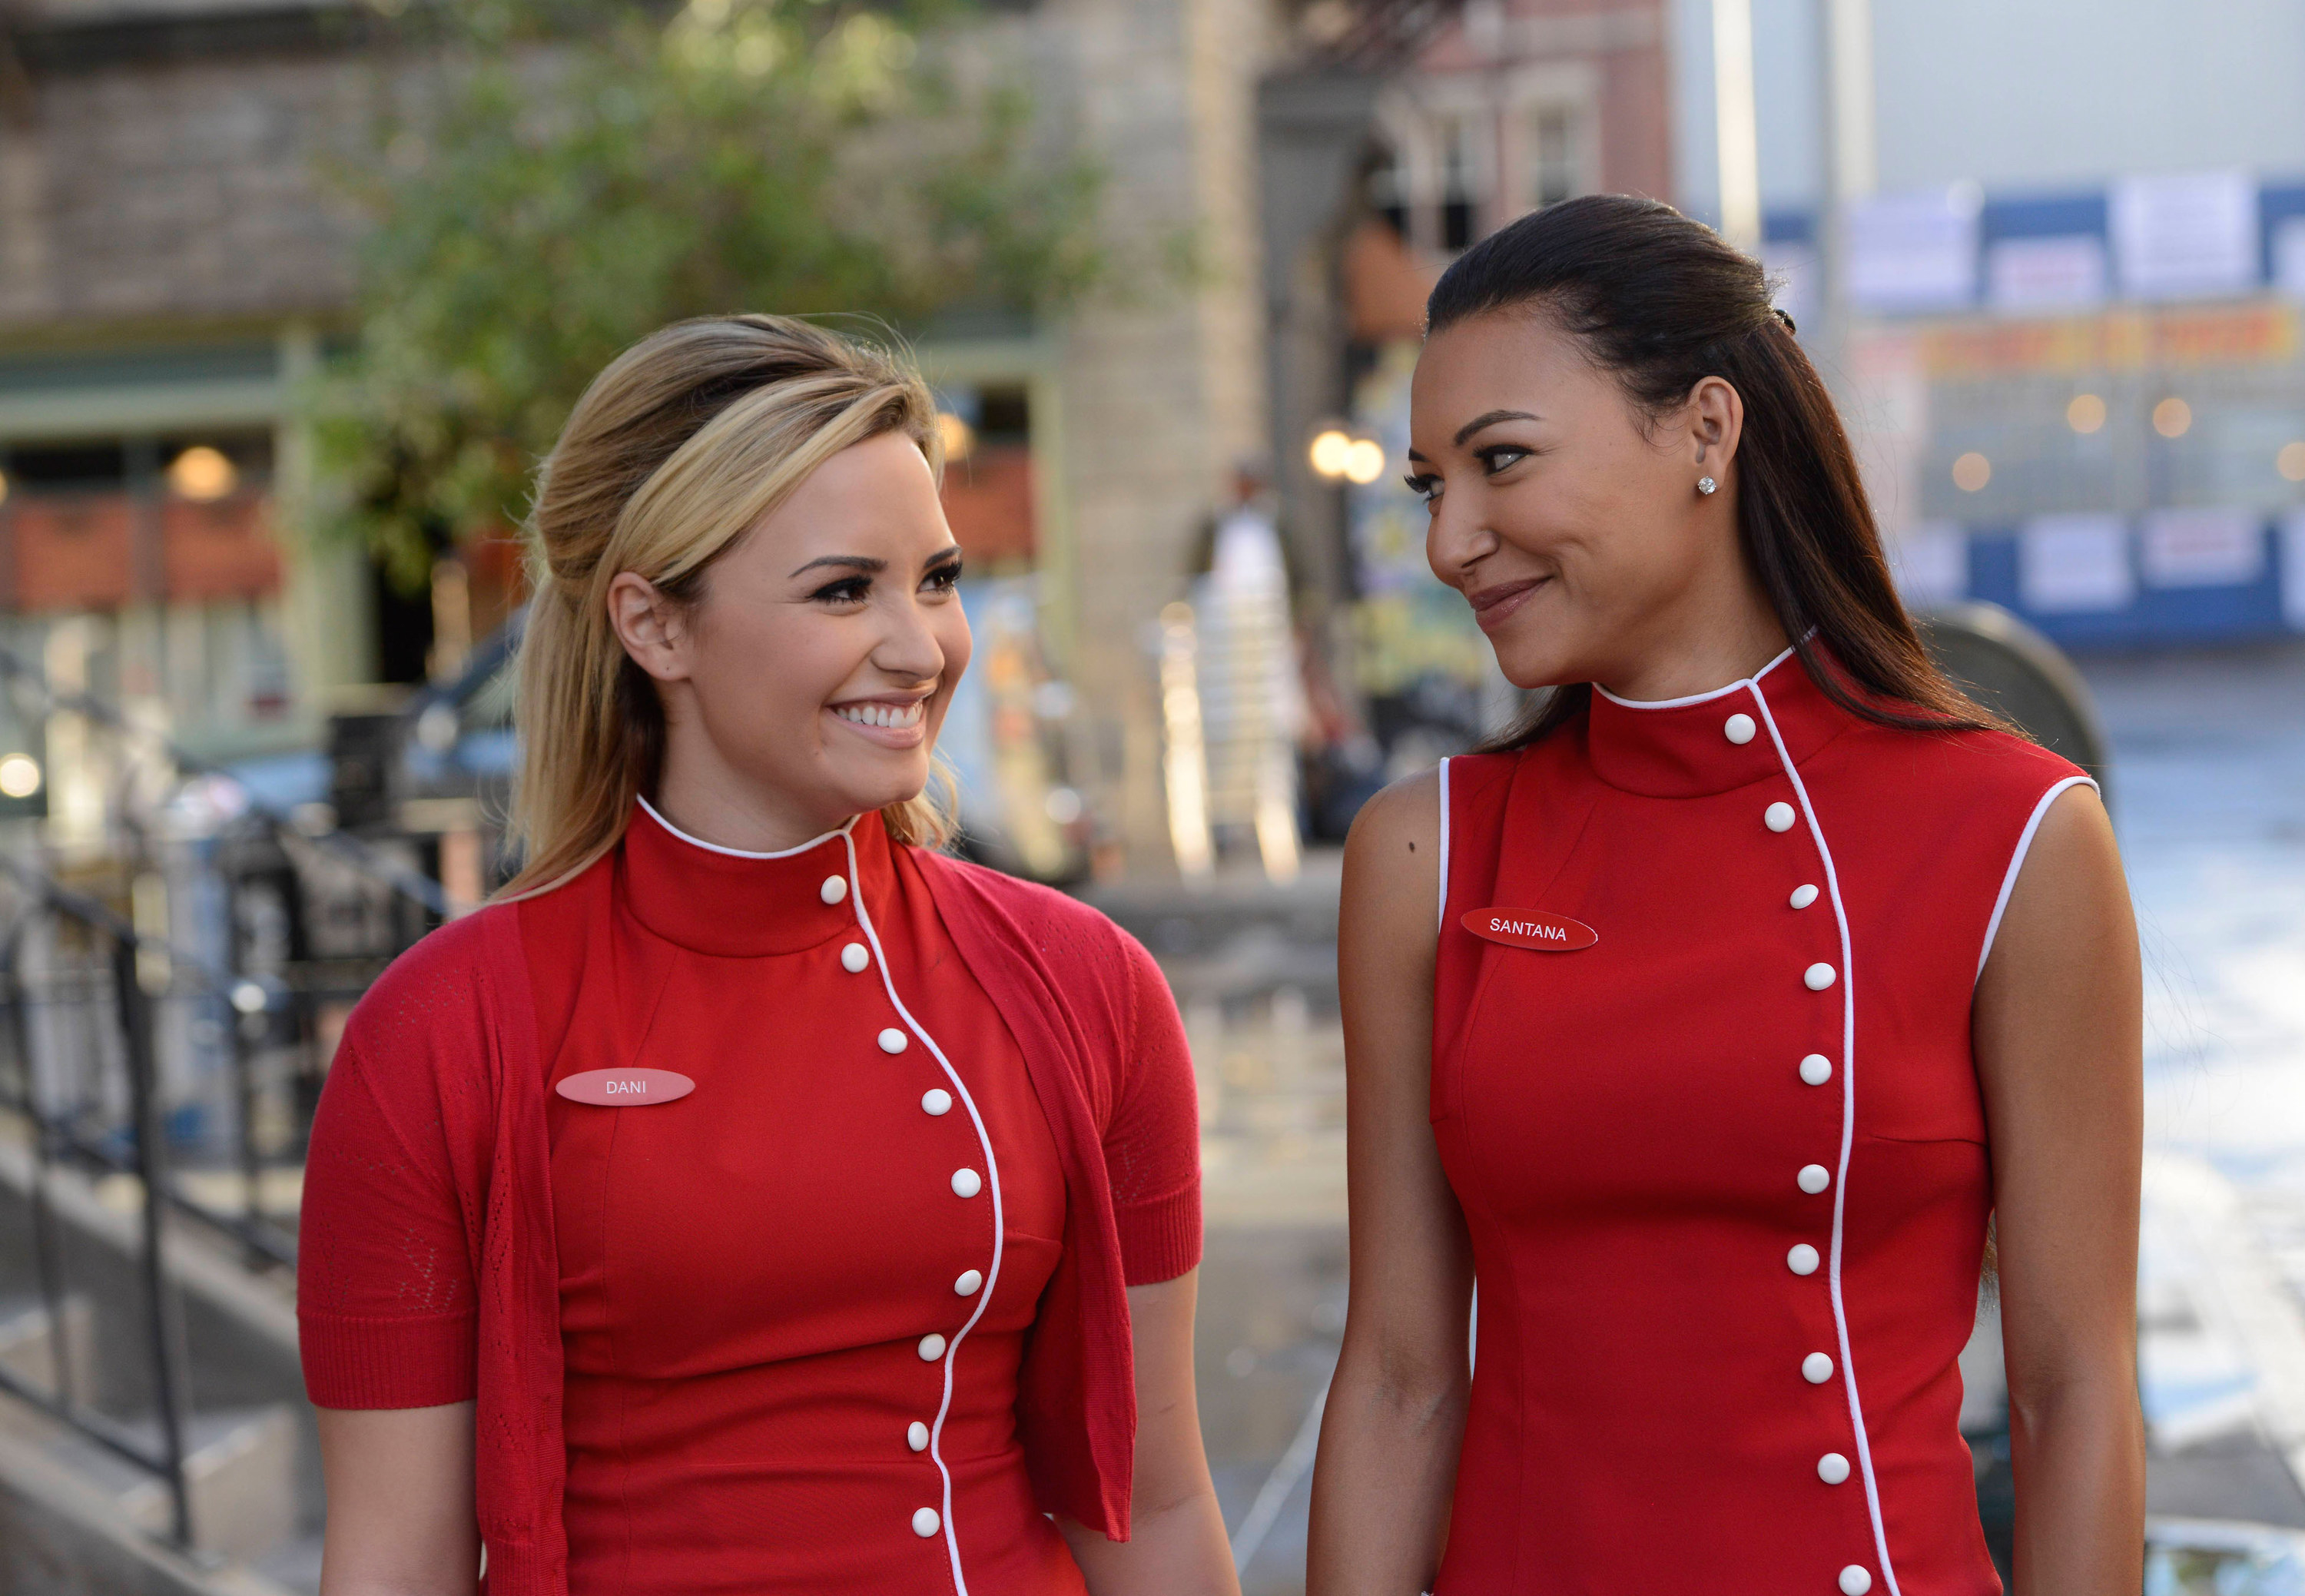 Dani and Santana smiling at each other